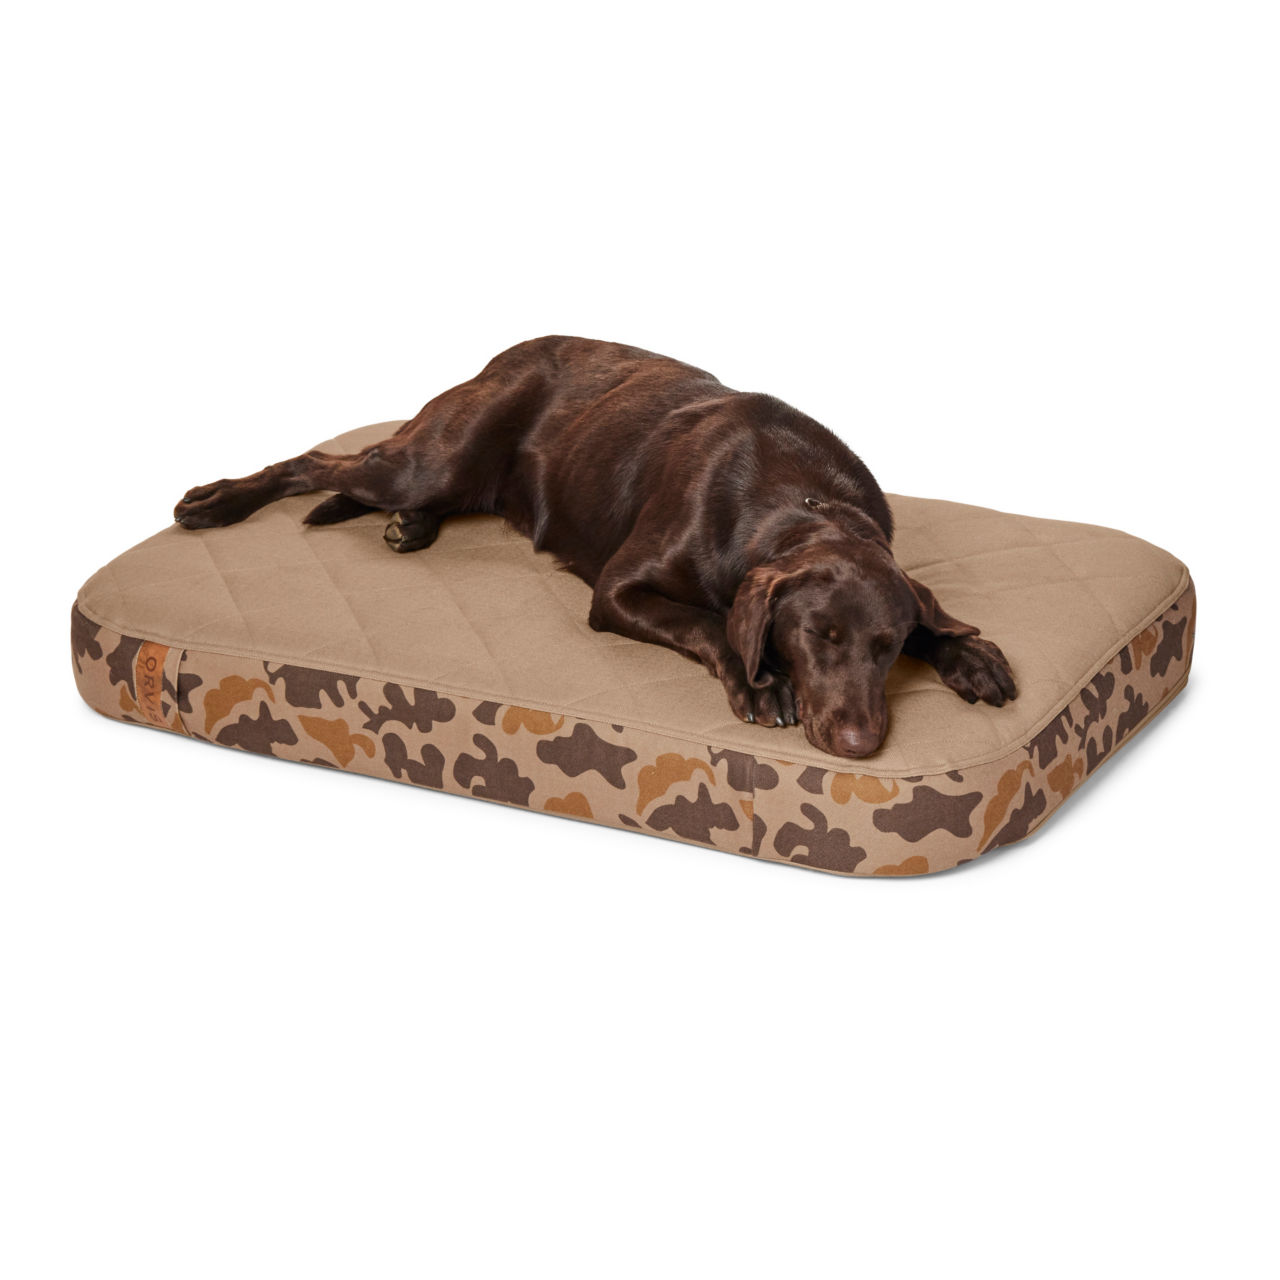 Orvis RecoveryZone® Lounger Dog Bed - 1971 CAMO image number 0